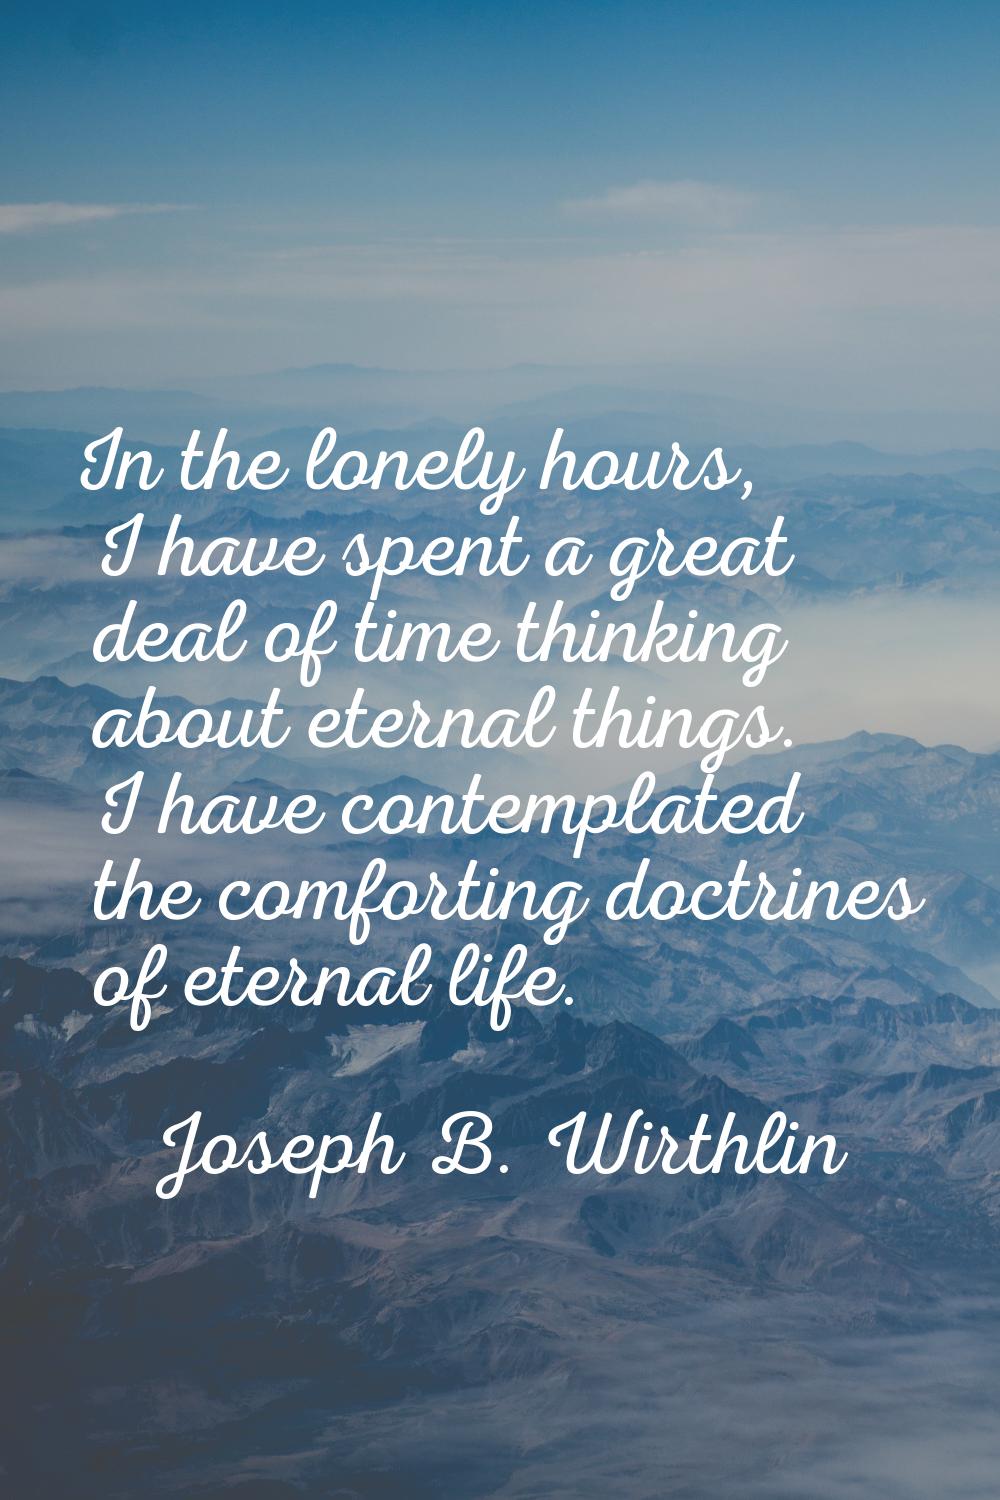 In the lonely hours, I have spent a great deal of time thinking about eternal things. I have contem